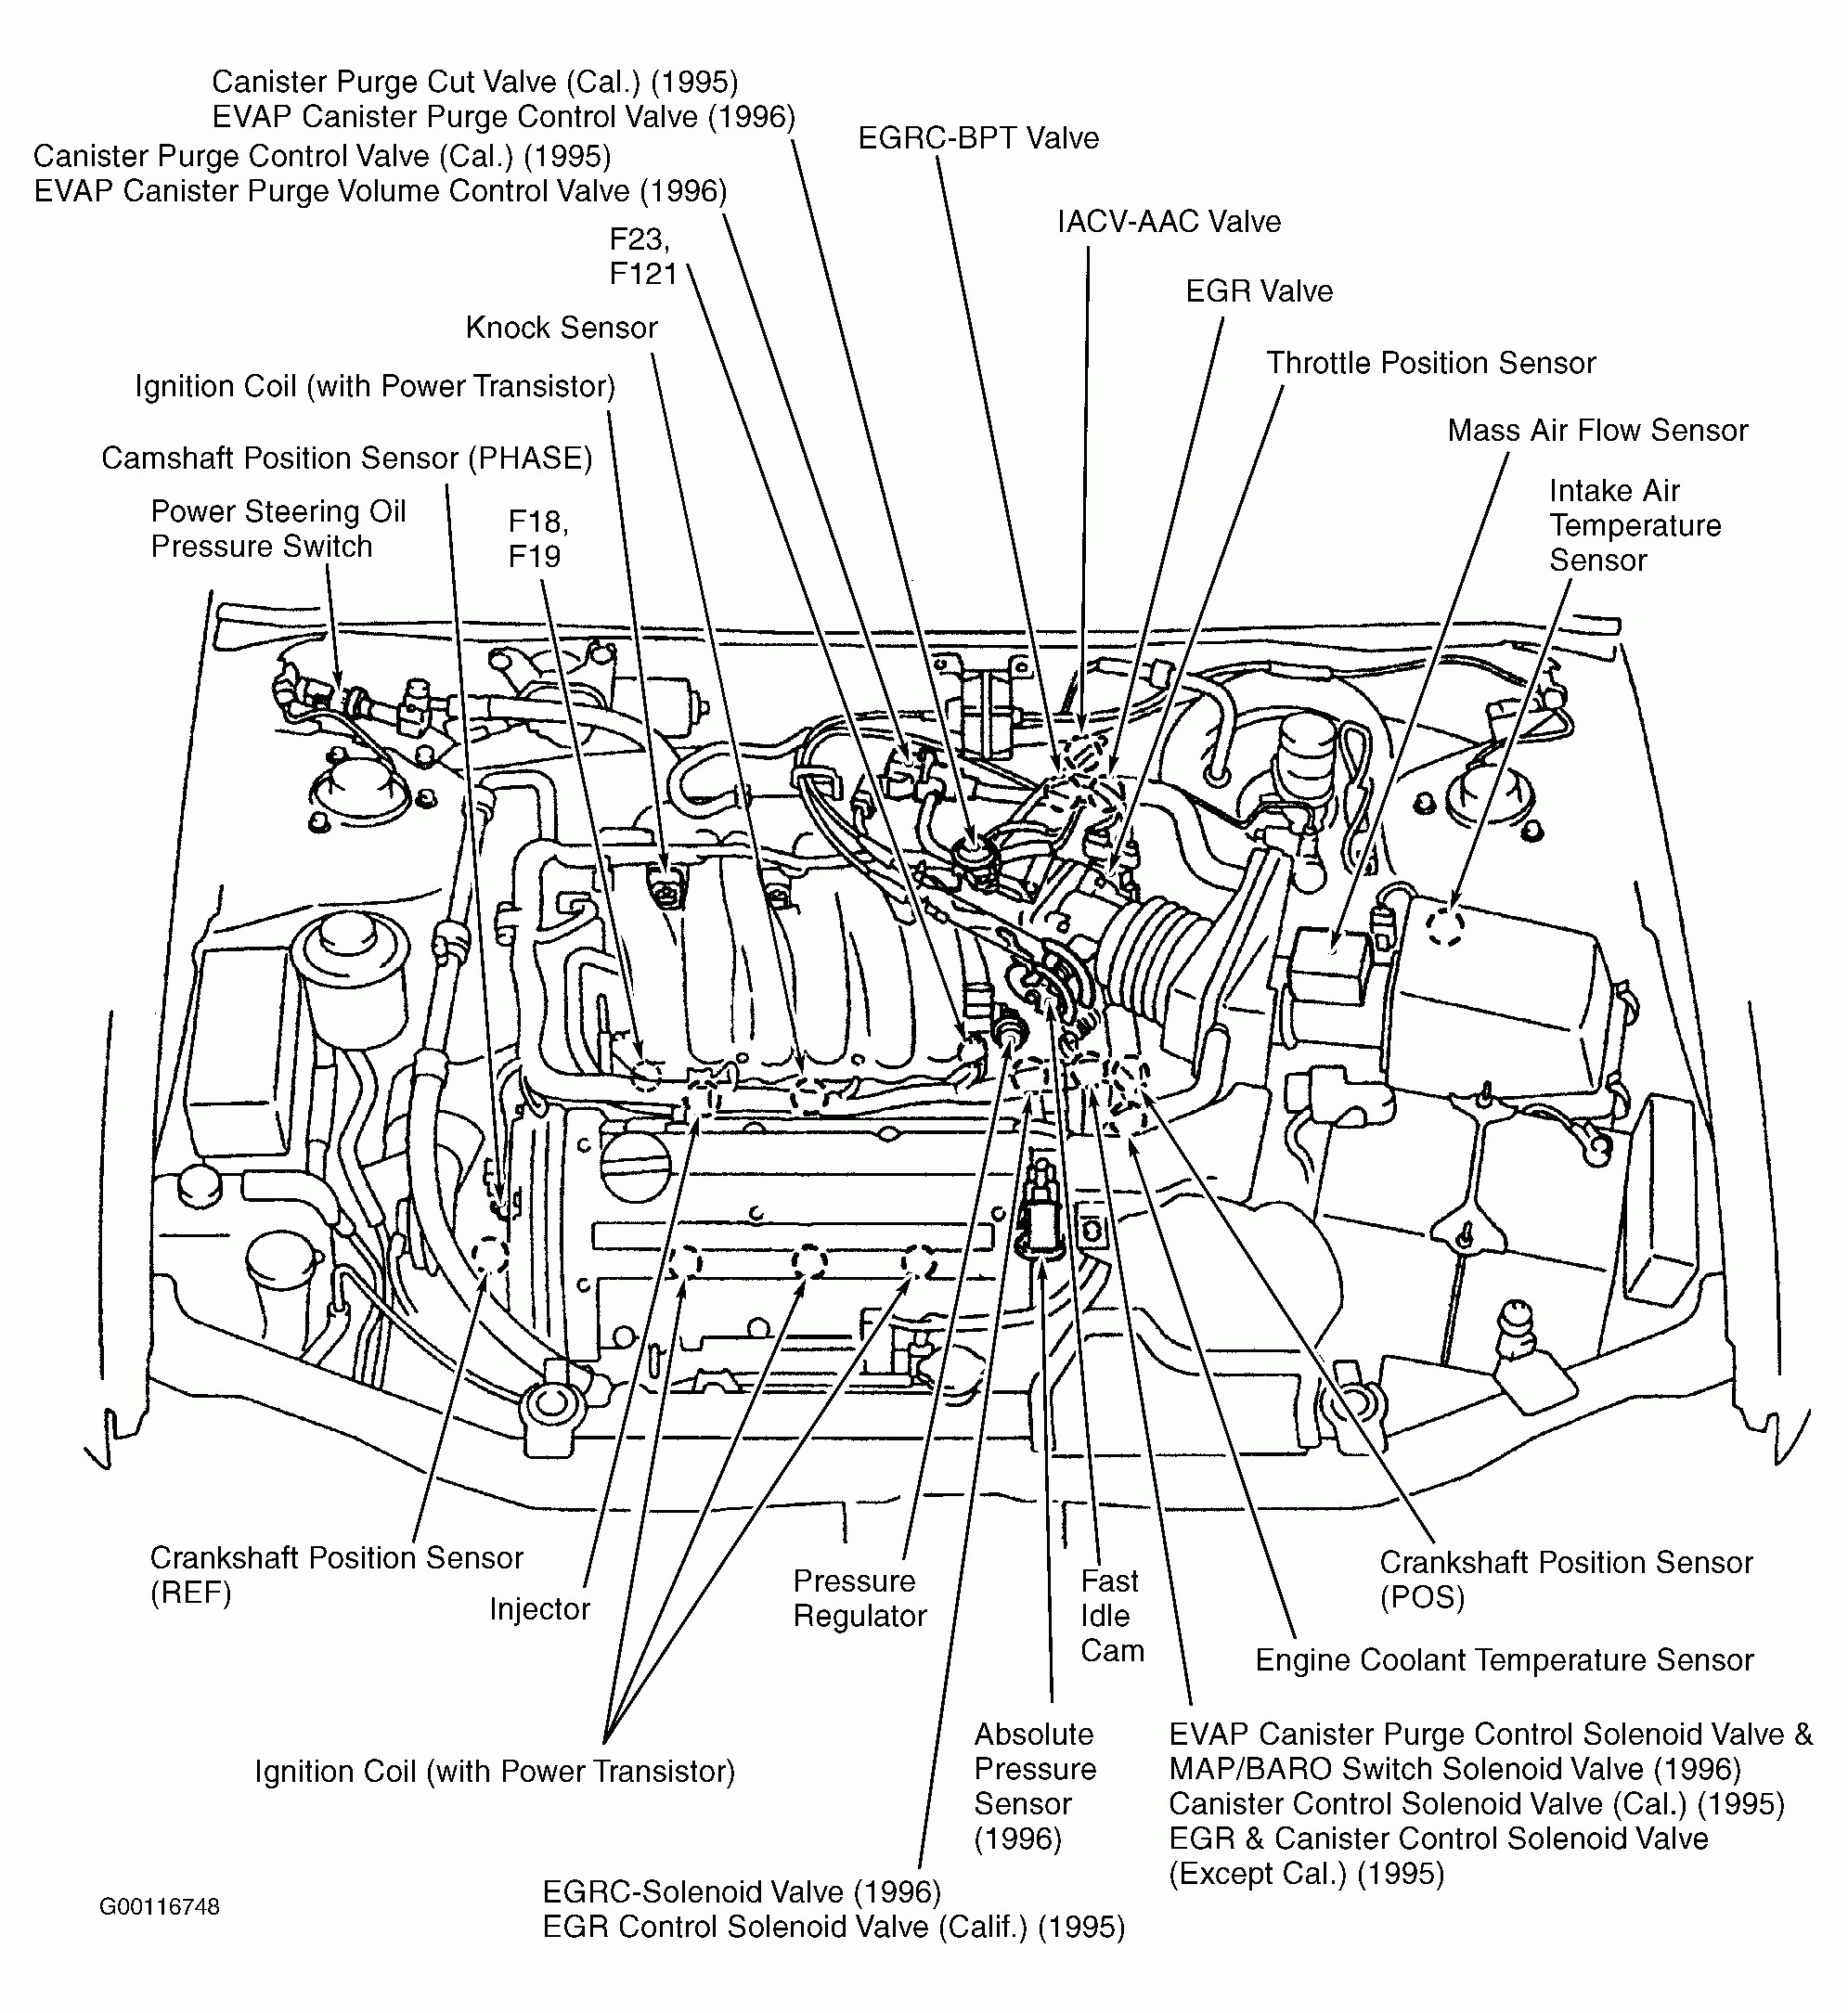 2002 Nissan Maxima Engine Diagram Take A Look About Nissan Maxima 1996 with Cool S Of 2002 Nissan Maxima Engine Diagram